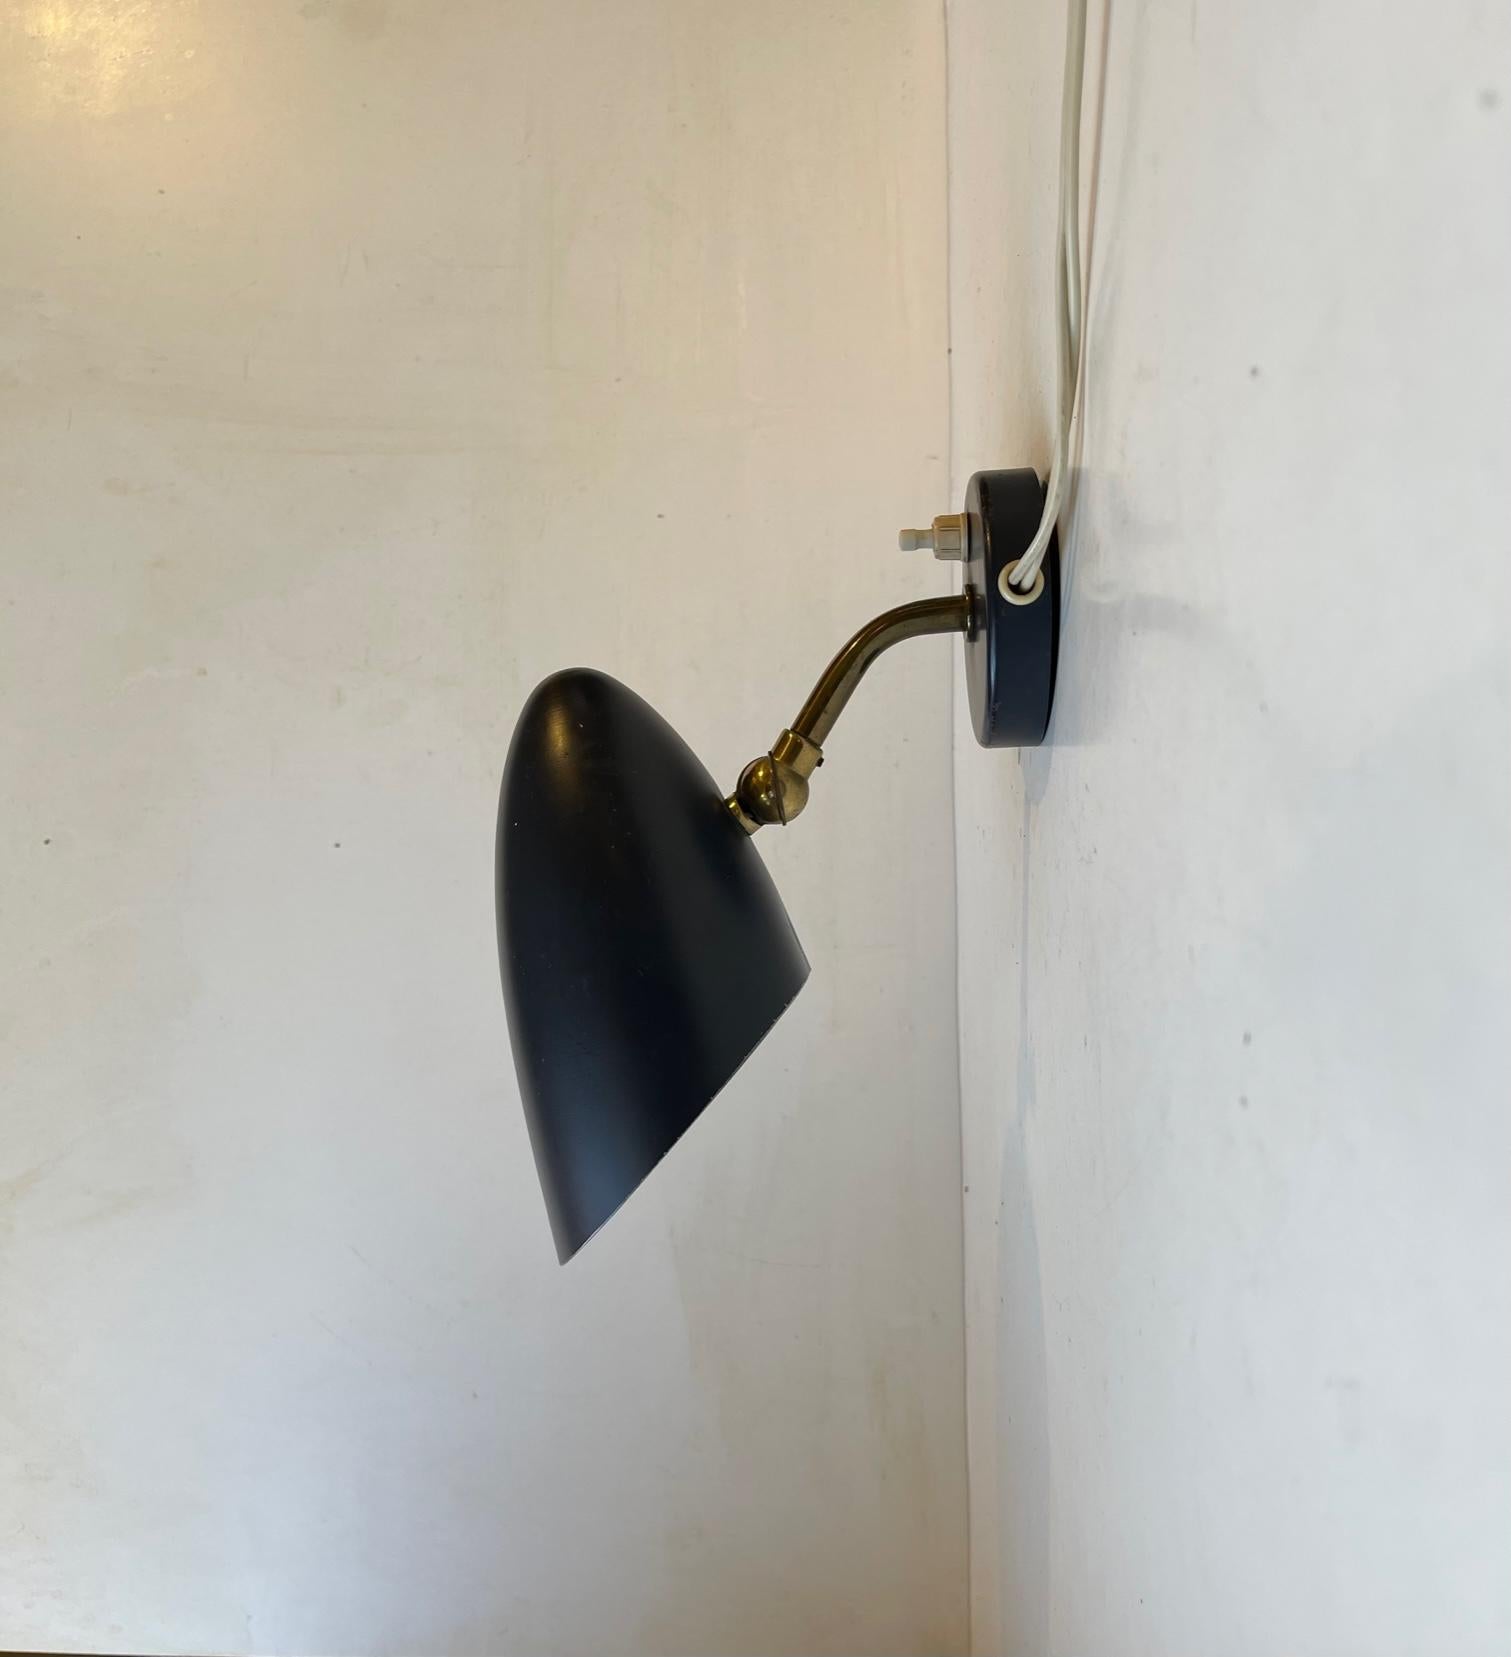 This small stylish matte black wall light was manufactured by Fog & Mørup in Denmark during the 1940s. The piece features an adjustable patinated brass rod that allows the user to direct light to the desired location. Reminiscent in style to pieces